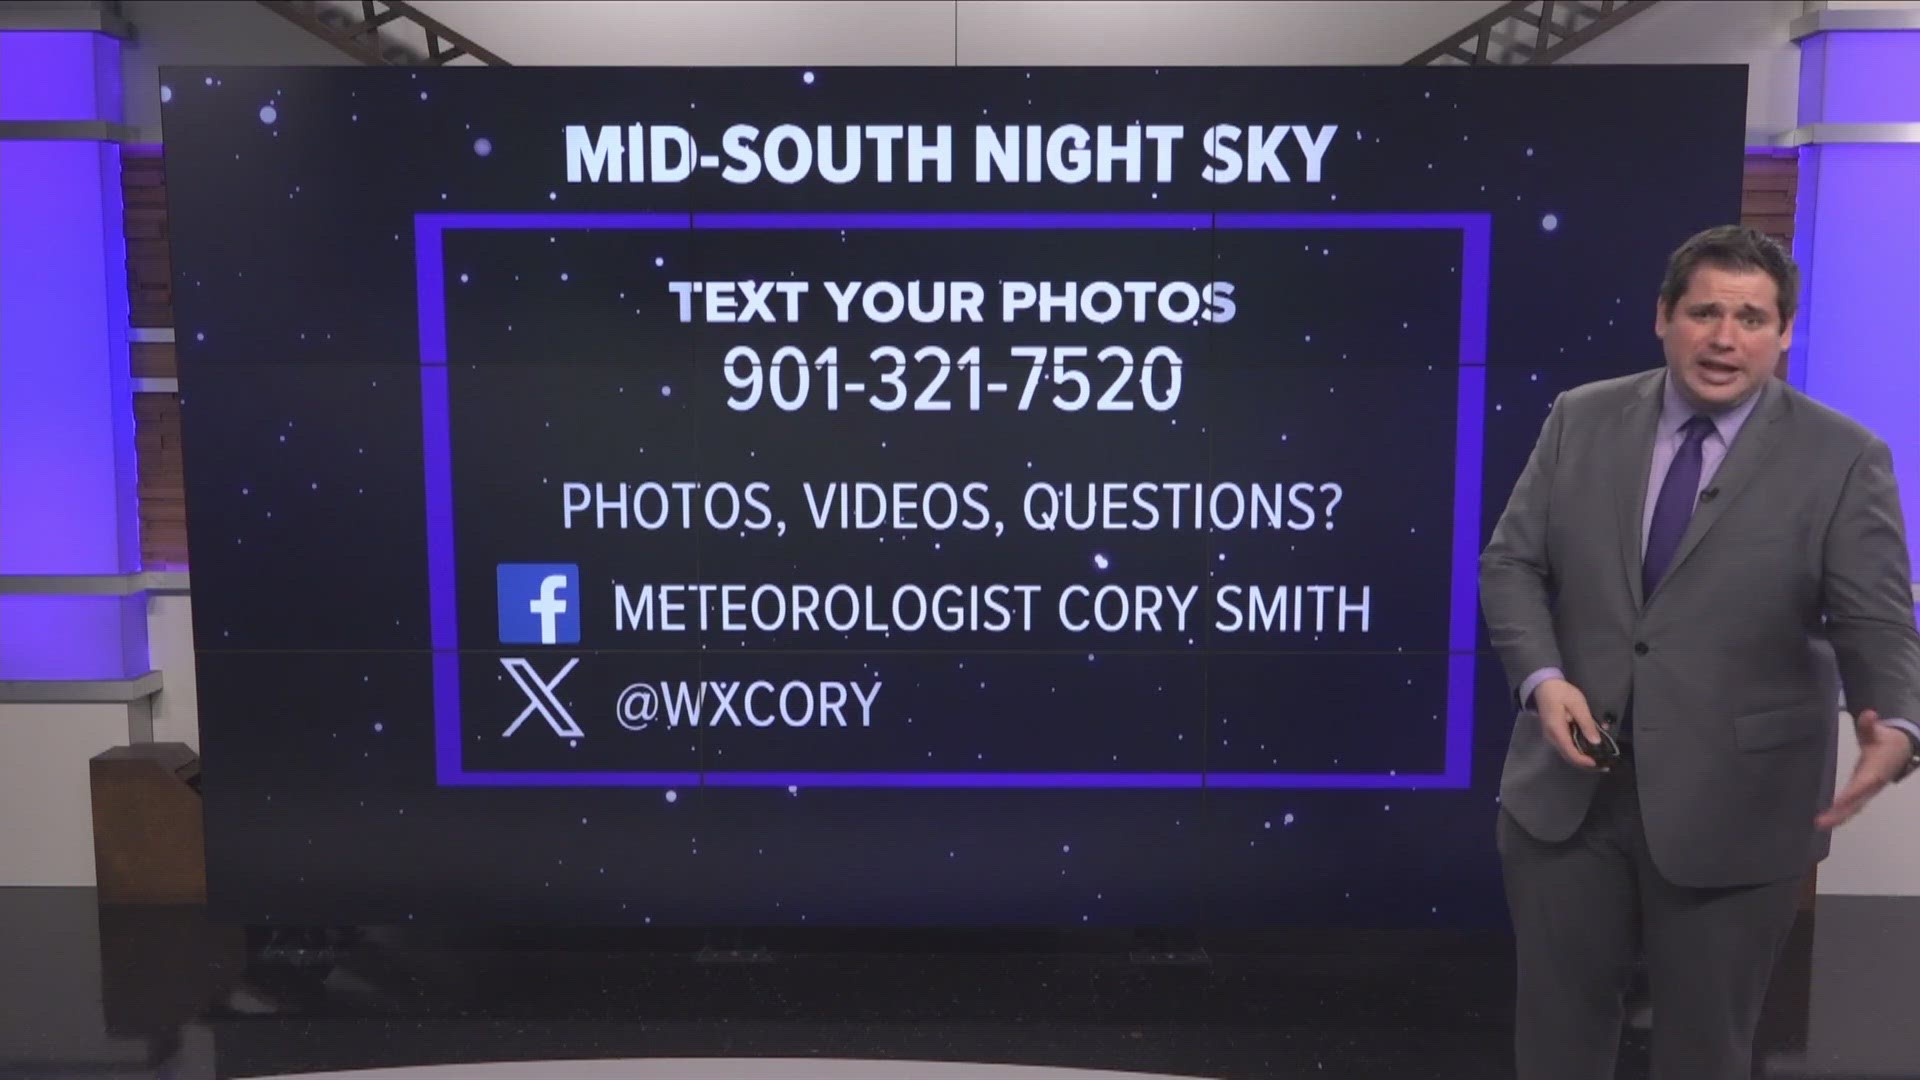 March nights are about to get a bit shorter, but what will you see? Meteorologist Cory Smith tells us what will be in our night sky.